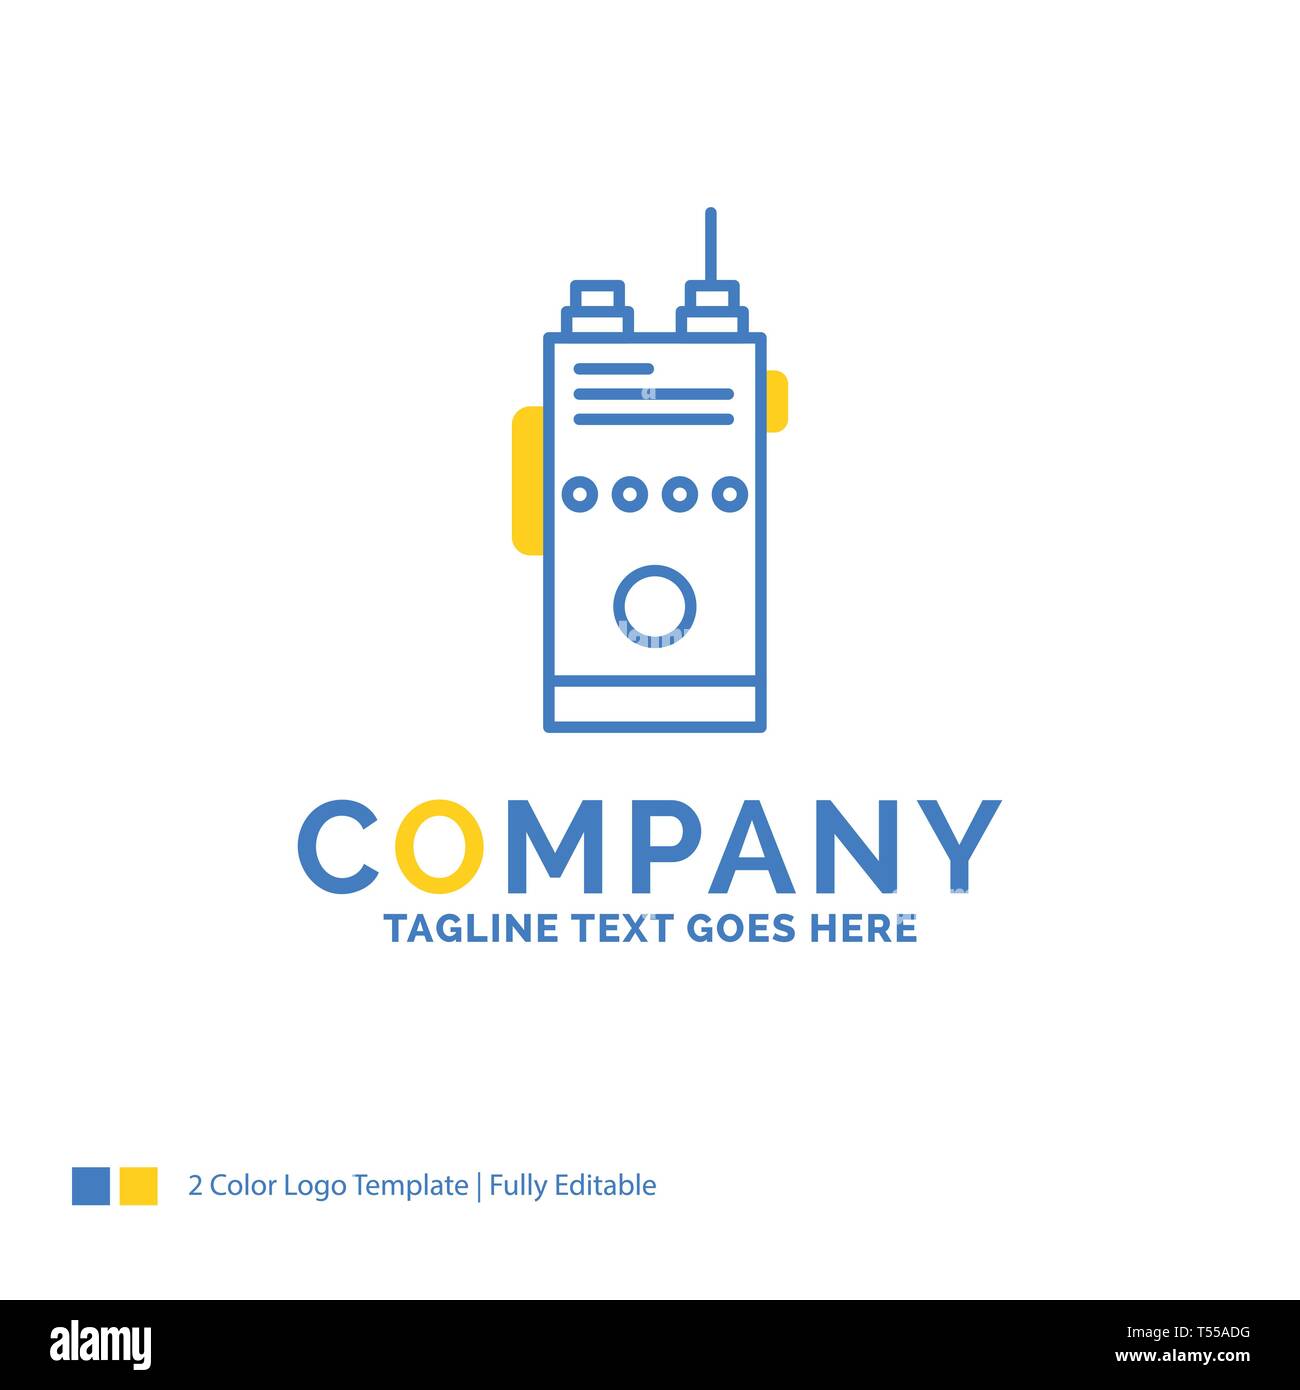 walkie, talkie, communication, radio, camping Blue Yellow Business Logo template. Creative Design Template Place for Tagline. Stock Vector